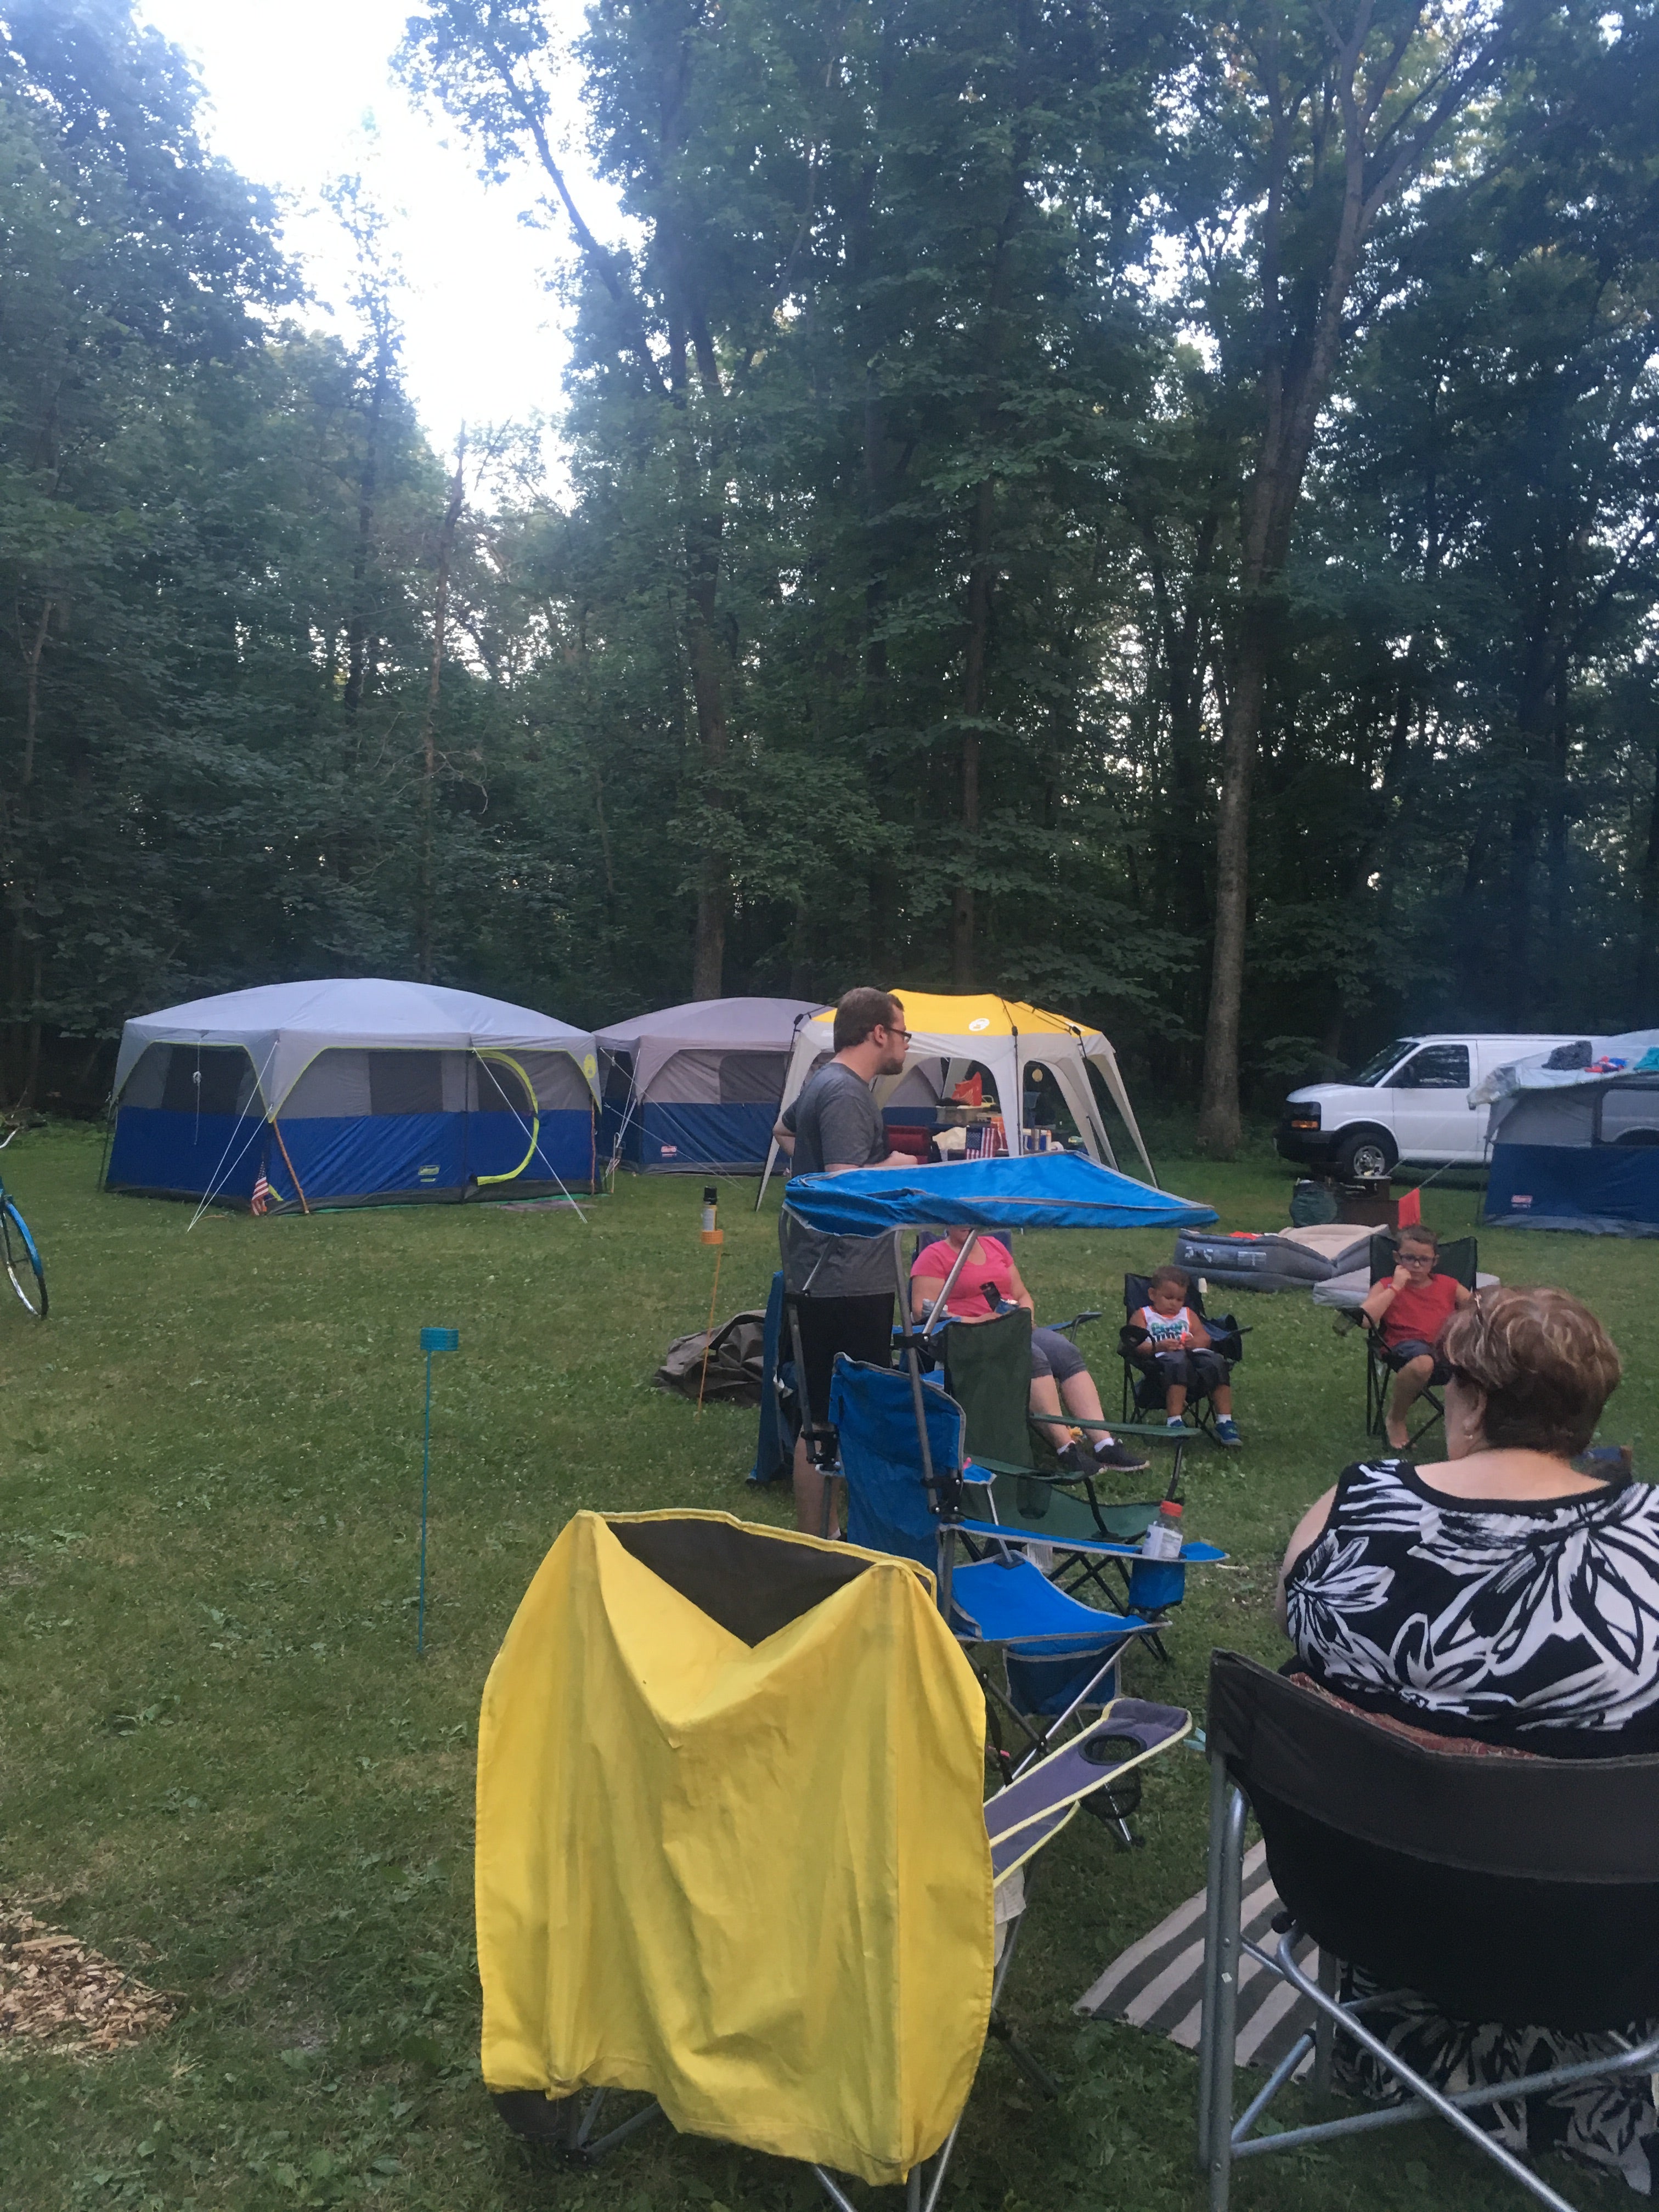 Camper submitted image from Fon du Lac County Waupun Park - 1